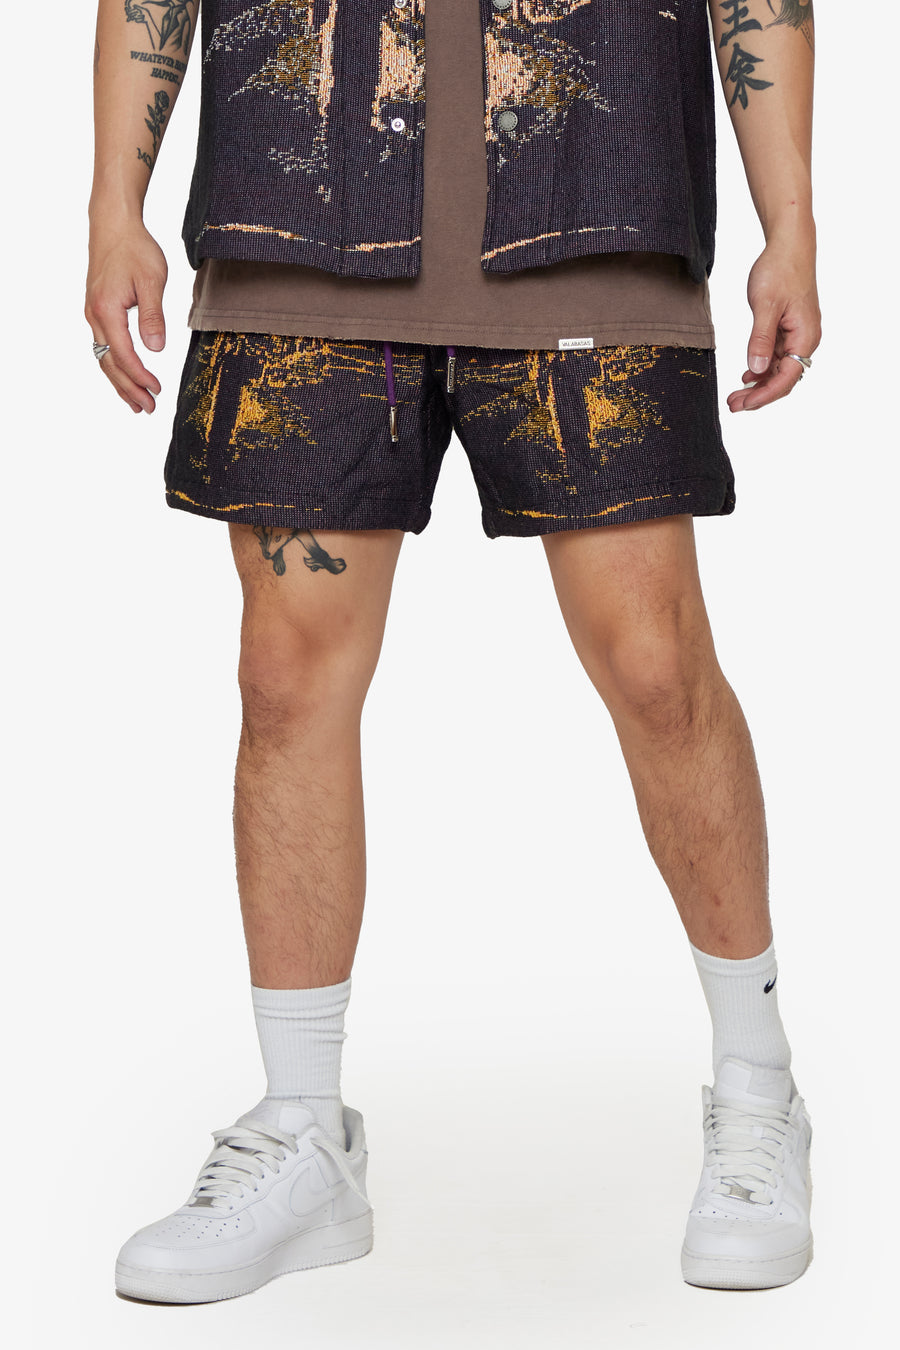 "GHOST HANDS" PURPLE TAPESTRY SHORTS